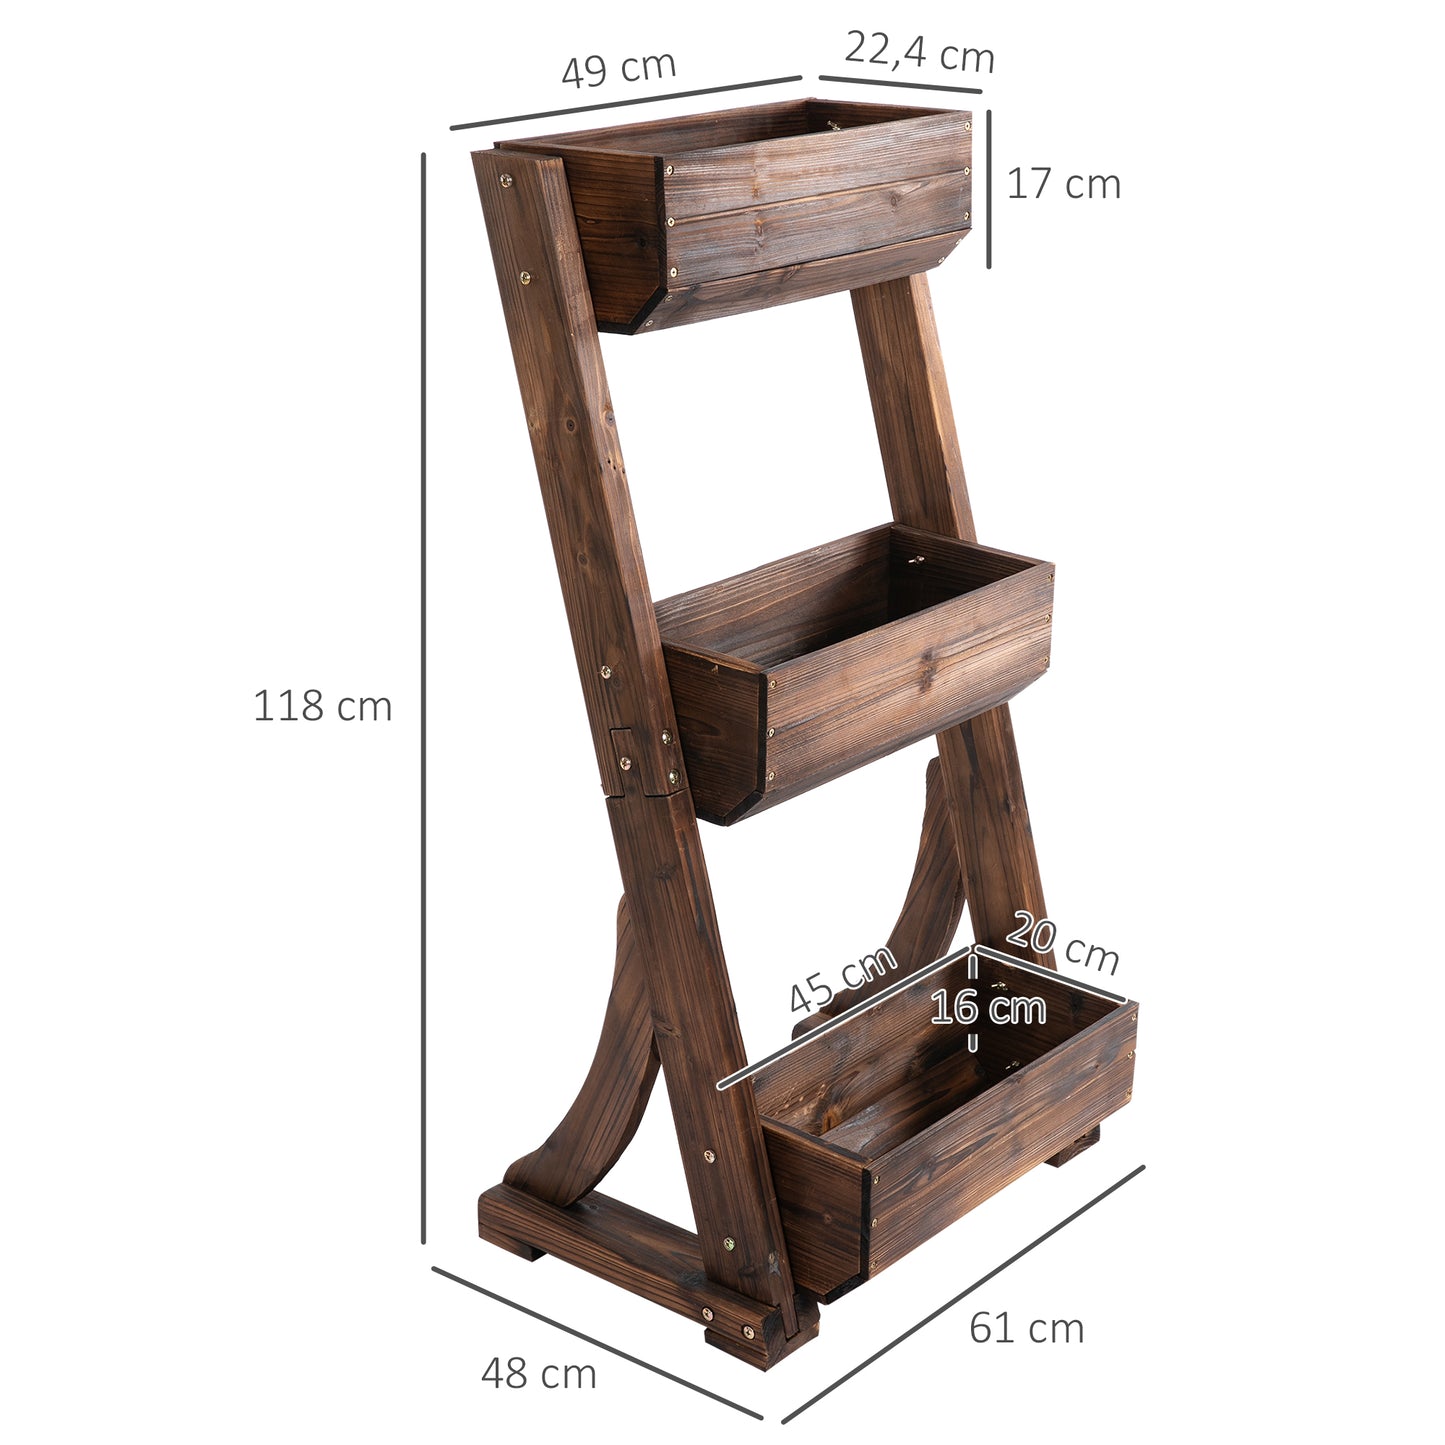 Outsunny 3-Tier Plant Stand Flower Stand Freestanding Outdoor Wooden Flower Rack Vertical Flower Pot Stands, 61 x 48 x 118 cm